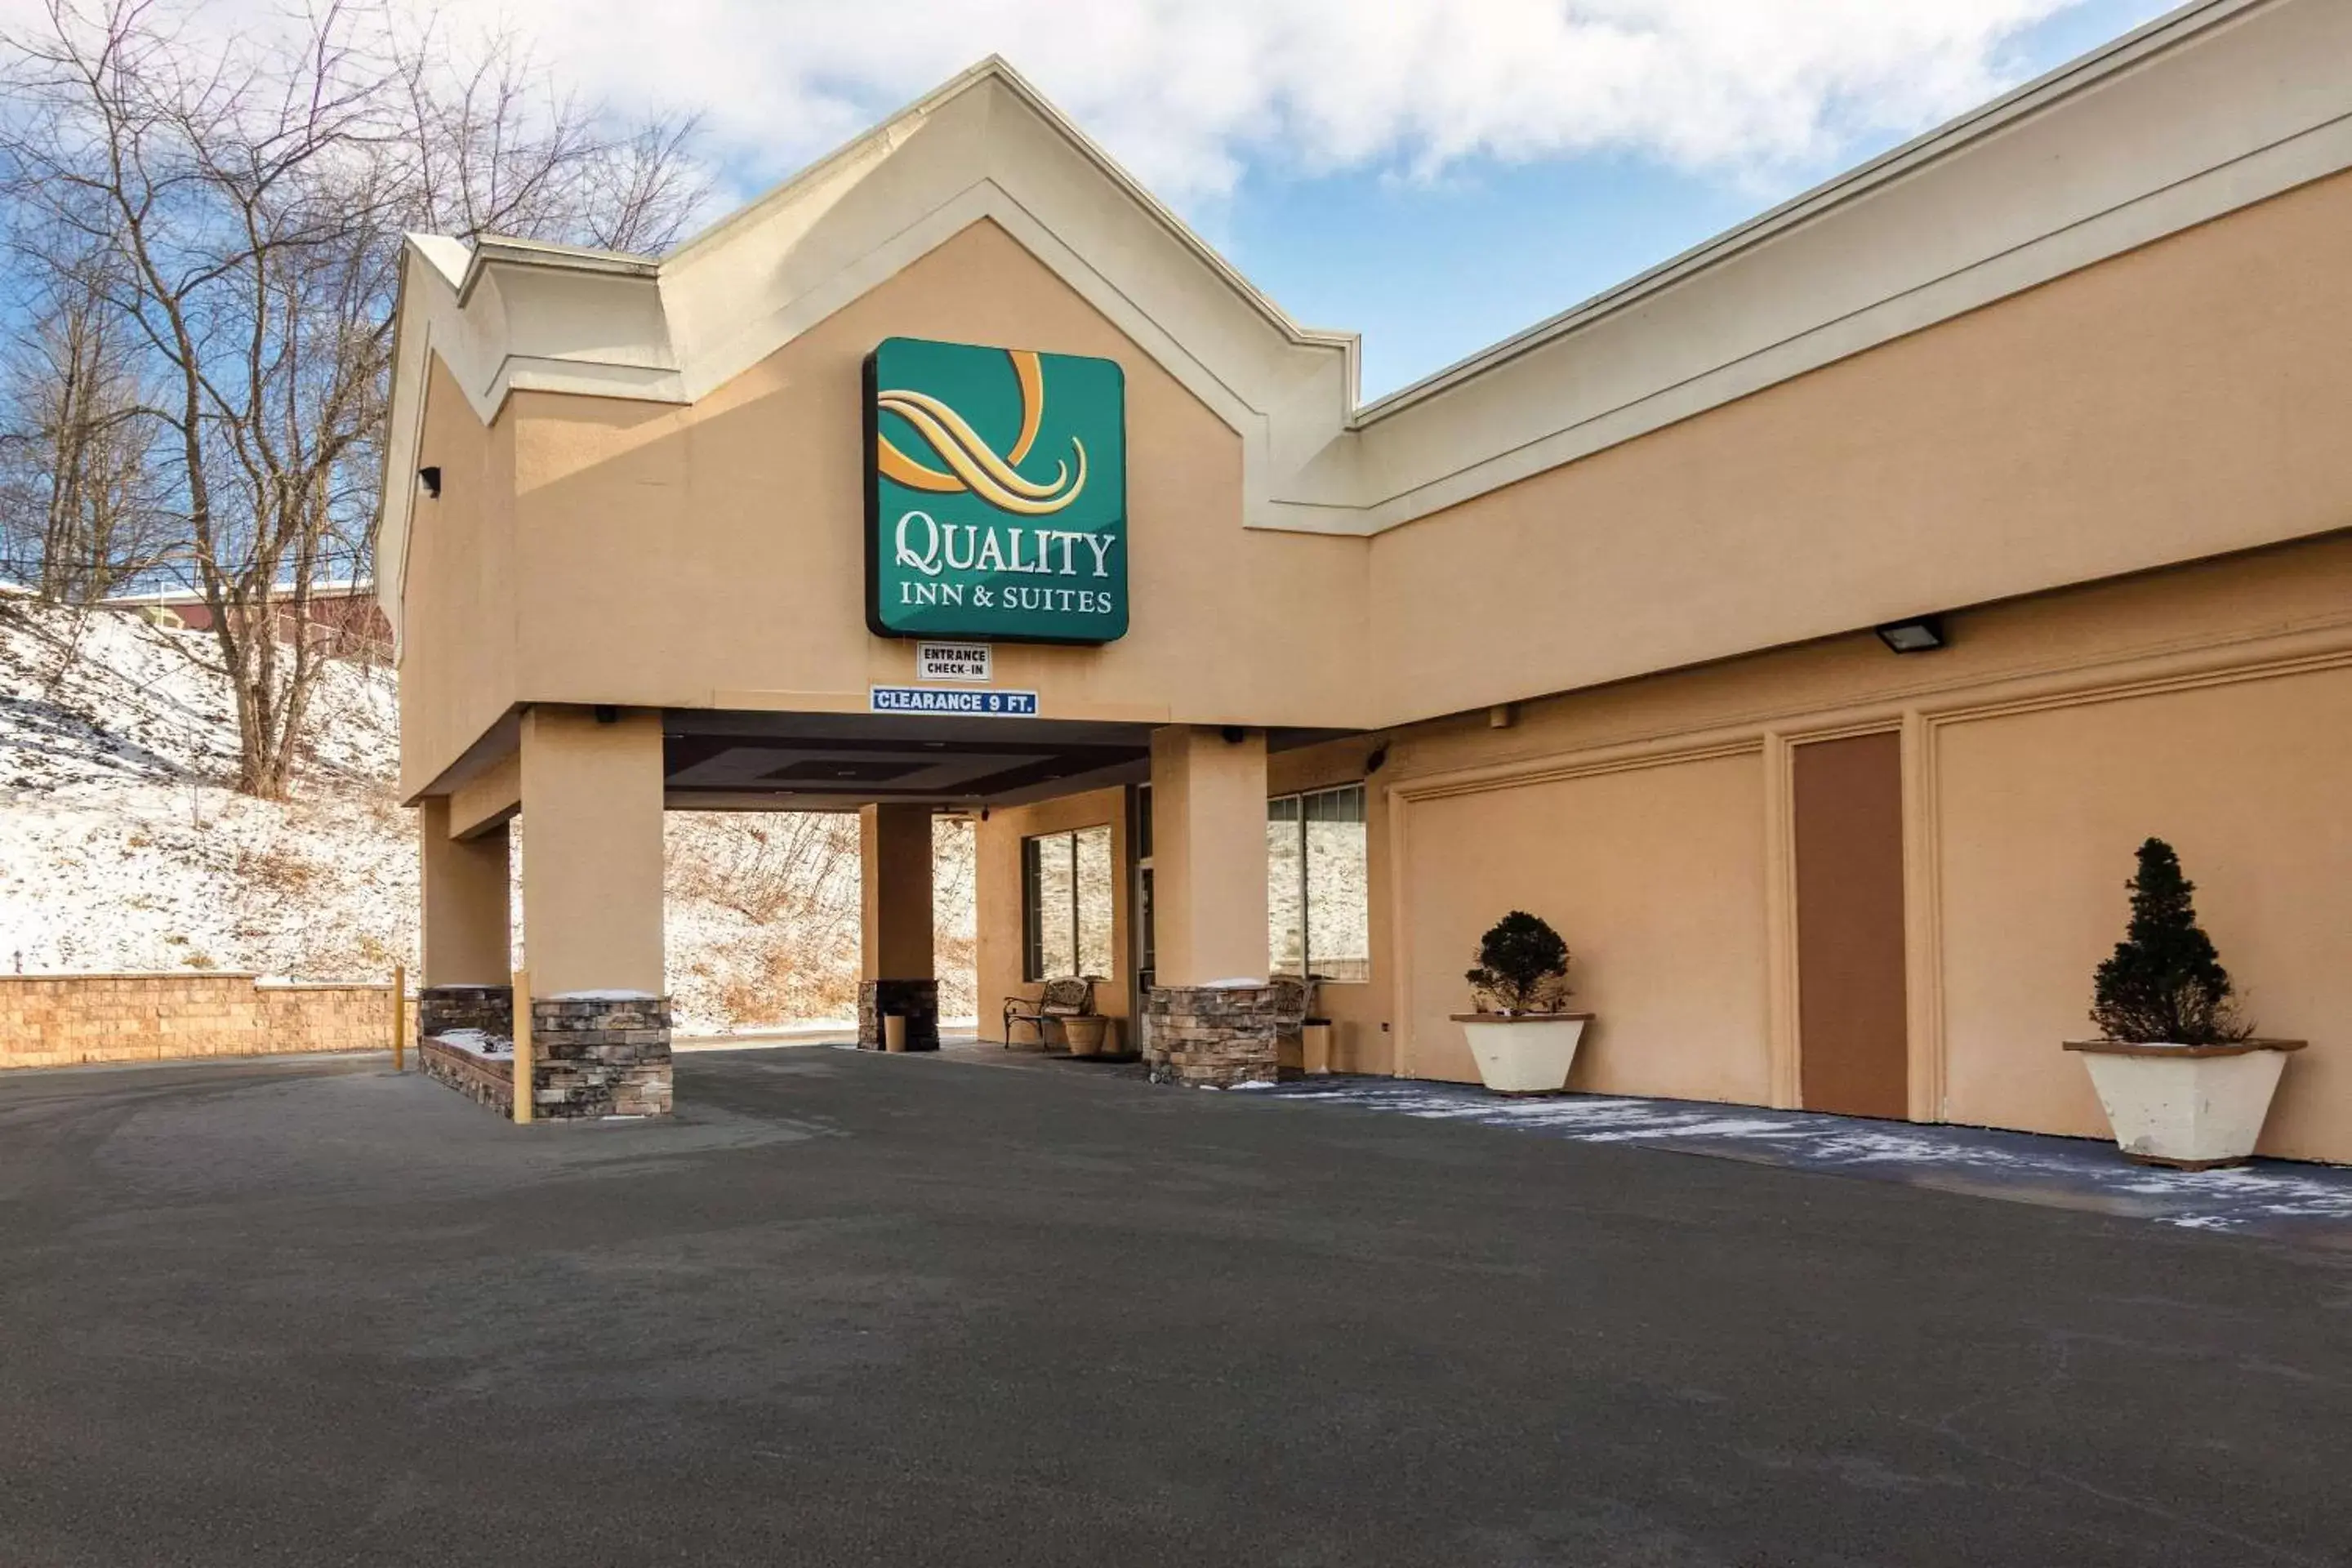 Property building in Quality Inn & Suites Indiana, PA